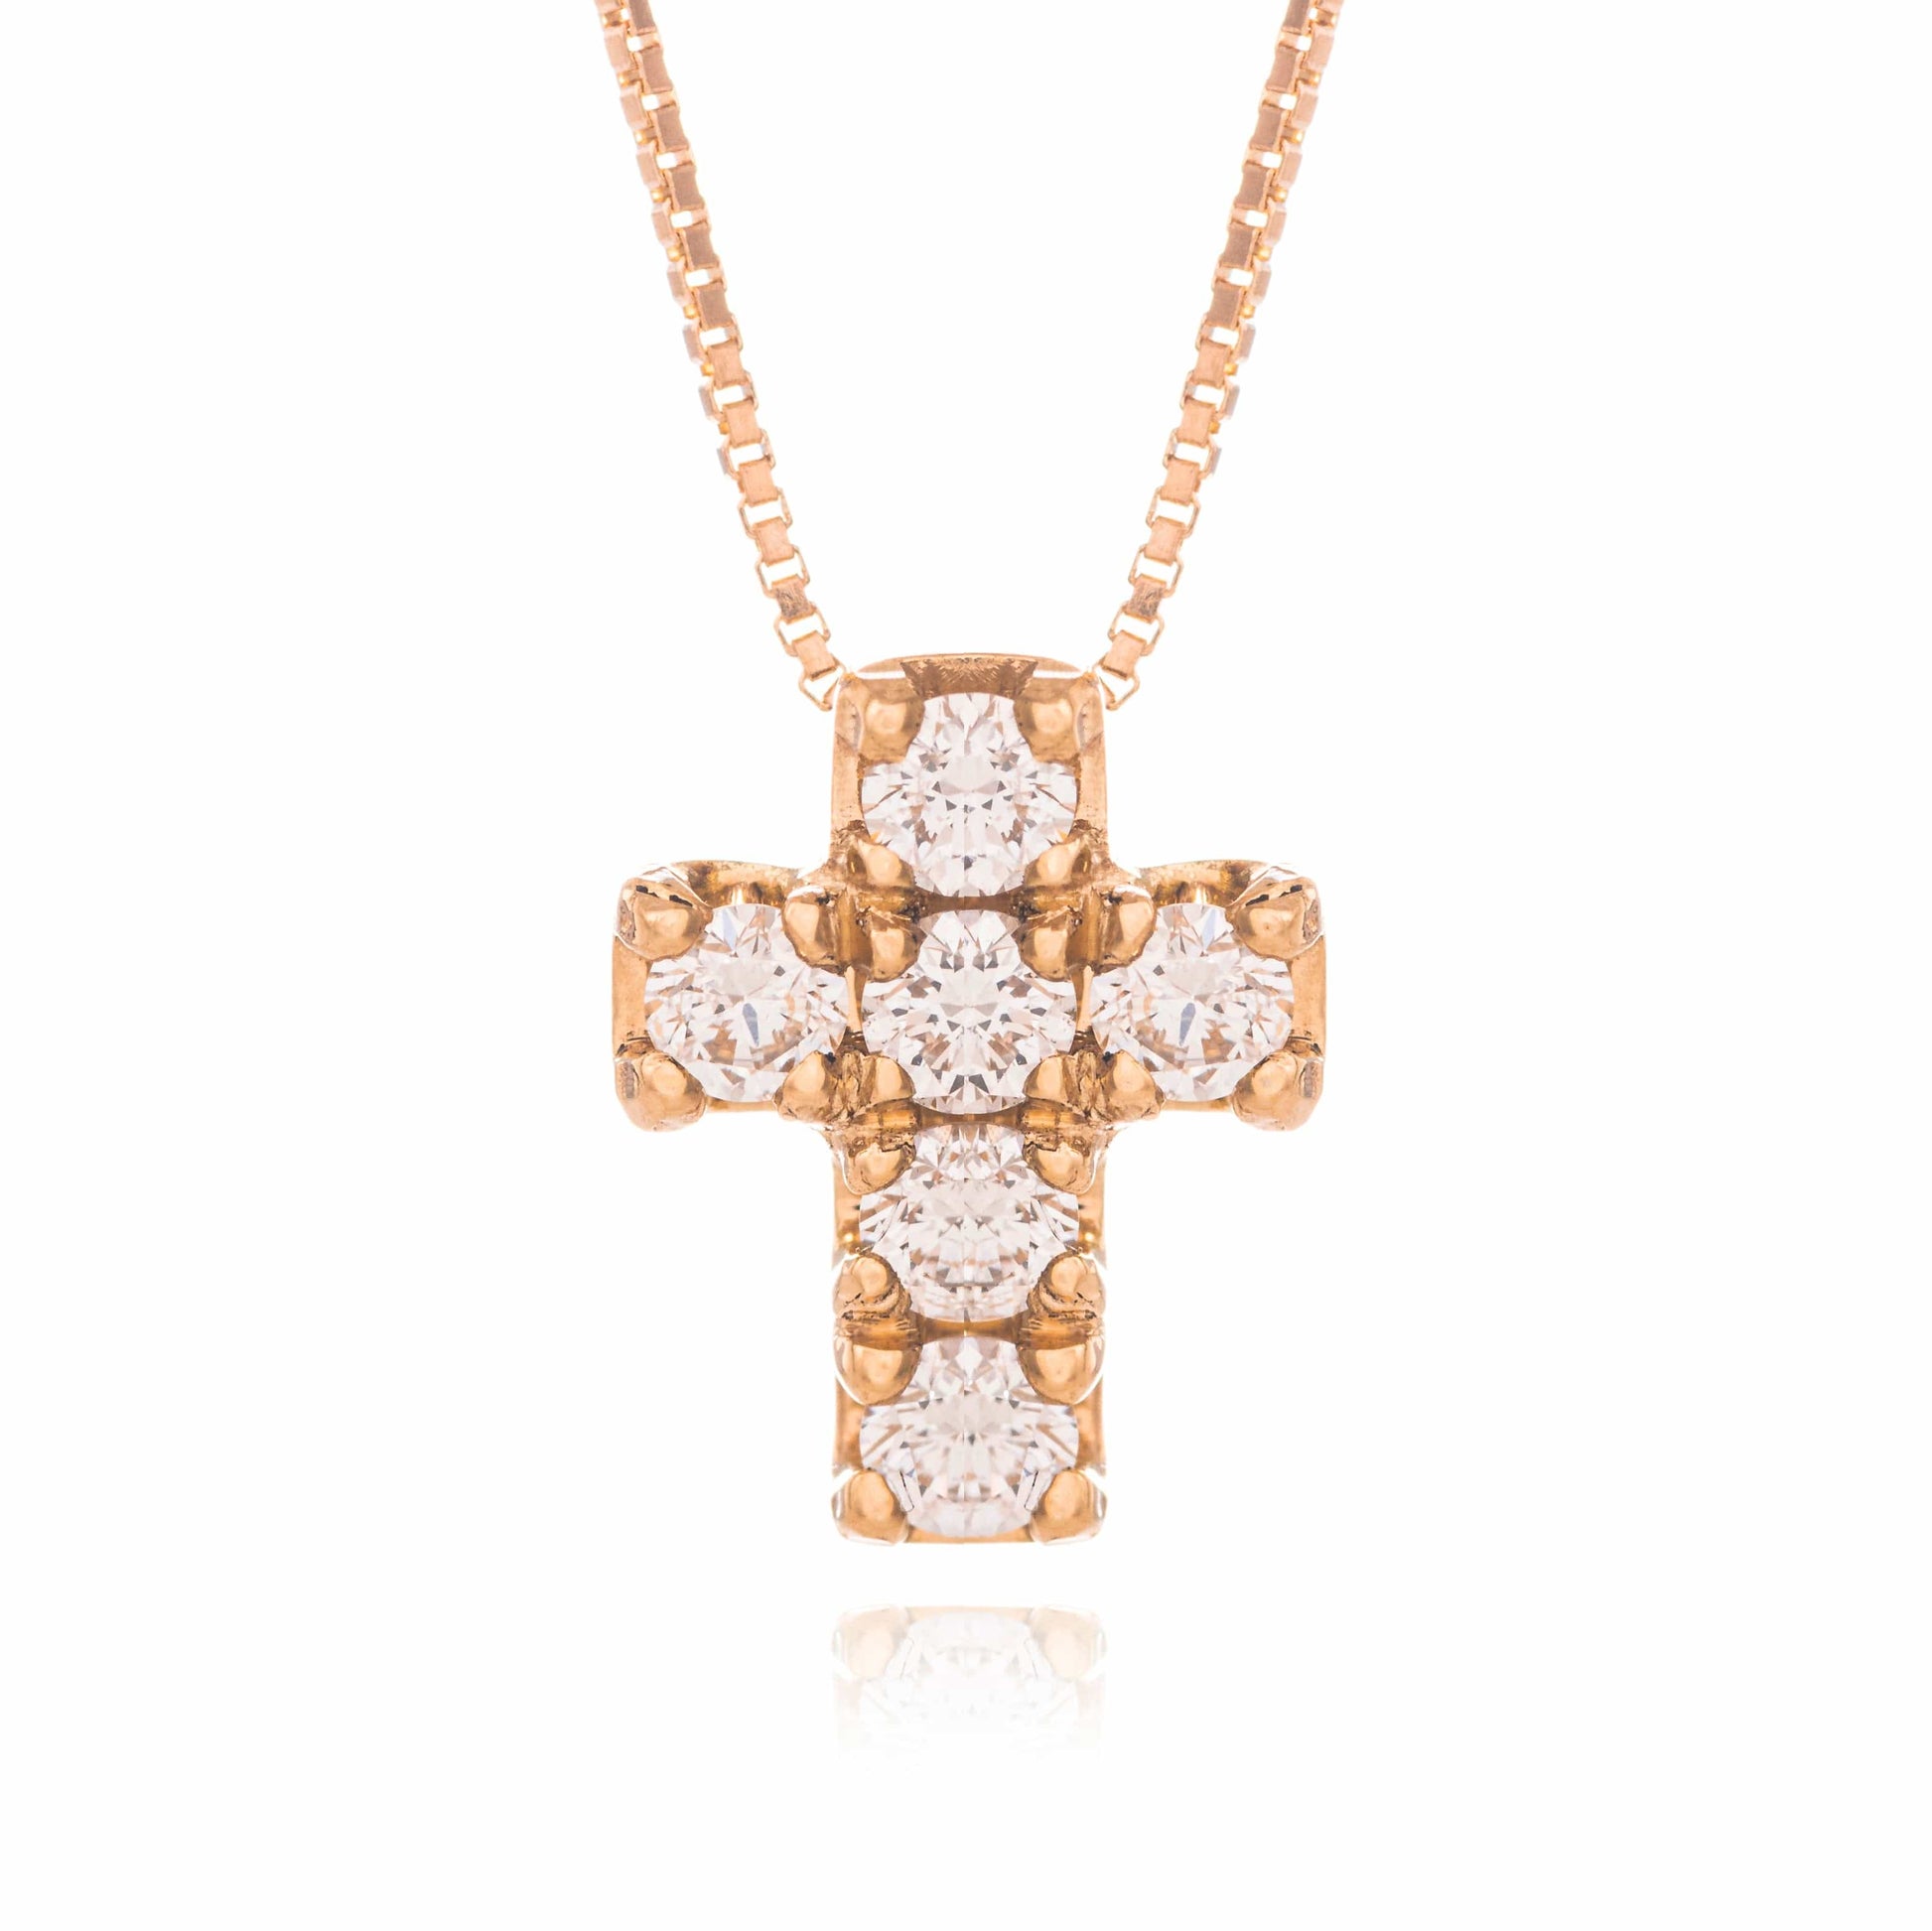 MONDO CATTOLICO Jewelry Cm 1 (0.39 in) / Cm 0.8 (0.31 in) Necklace with Pink Gold Cross and Diamonds